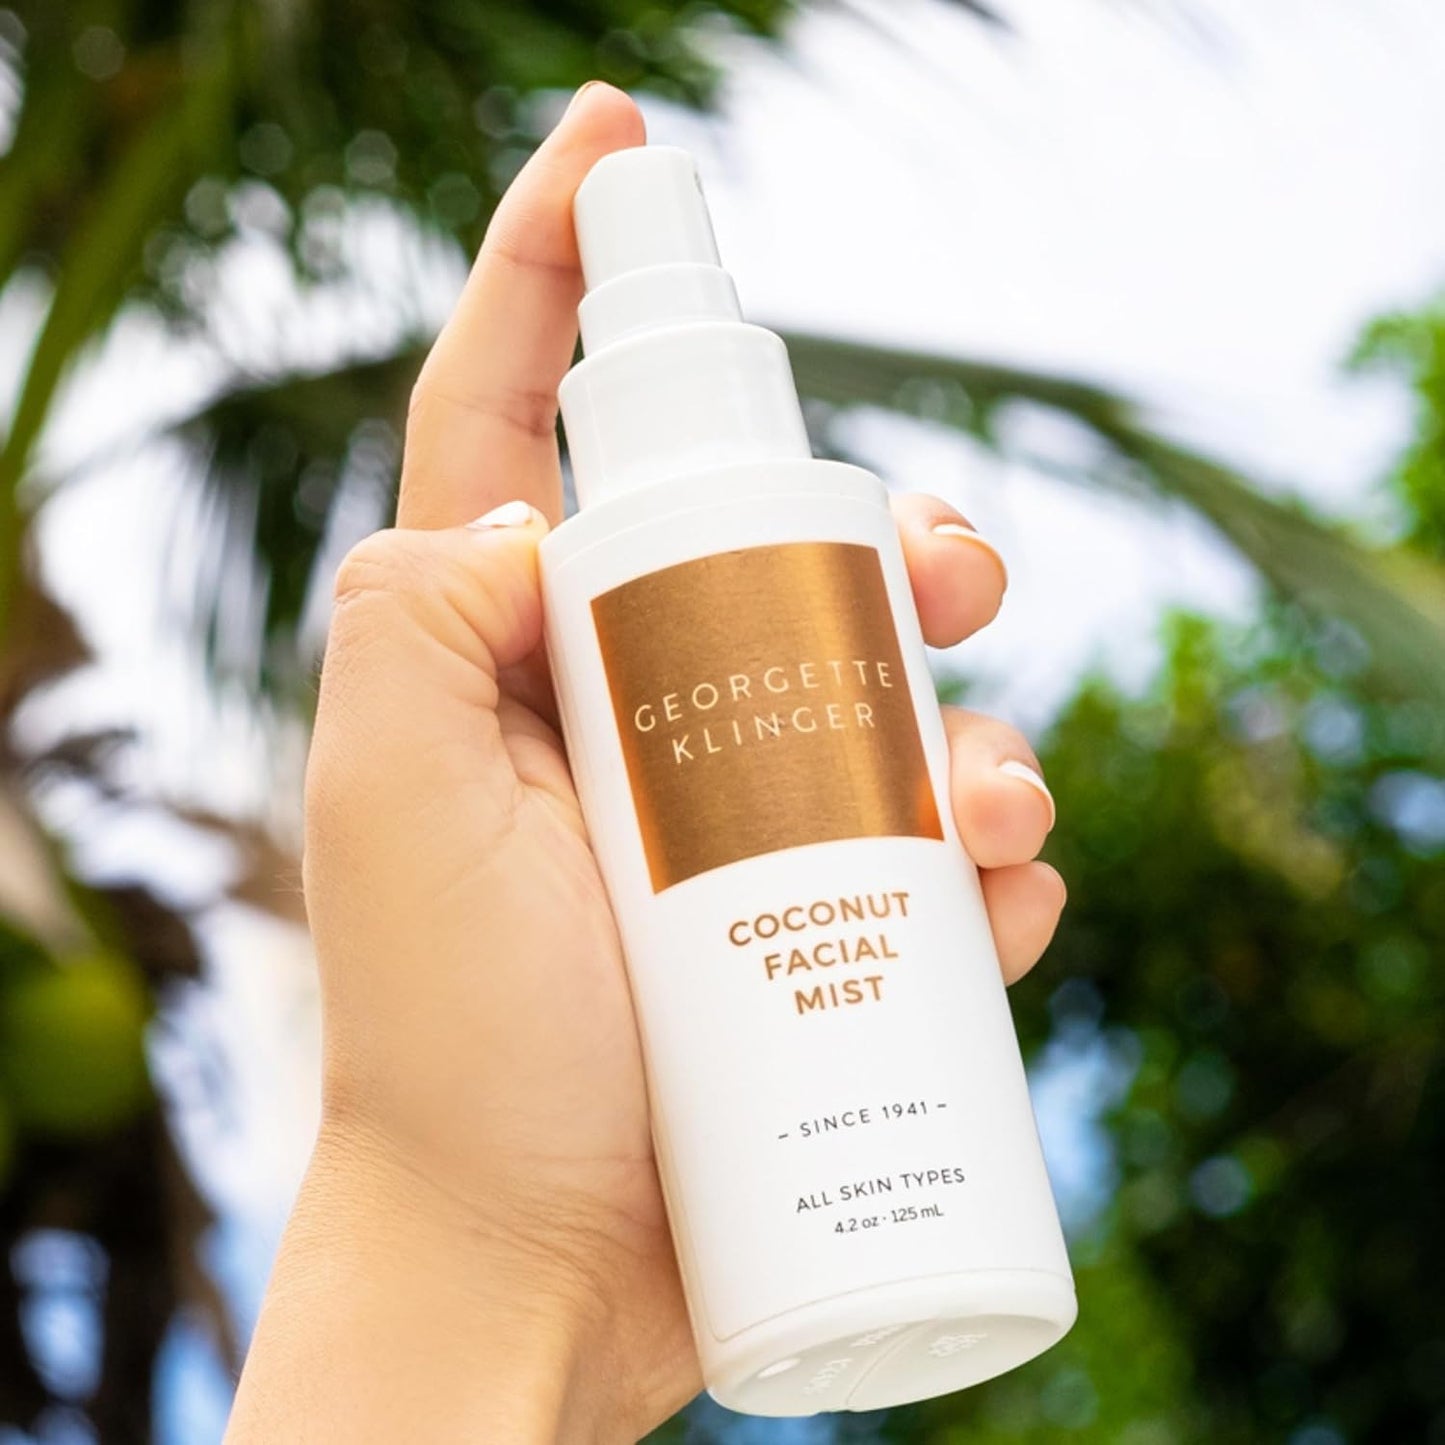 "Revitalize and Refresh with Our Coconut Facial Mist - the Ultimate Hydrating Makeup Setting Spray for a Dewy Matte Face, Infused with Moisturizing Antioxidants to Protect and Plump Dehydrated Skin - 4.2 Oz"